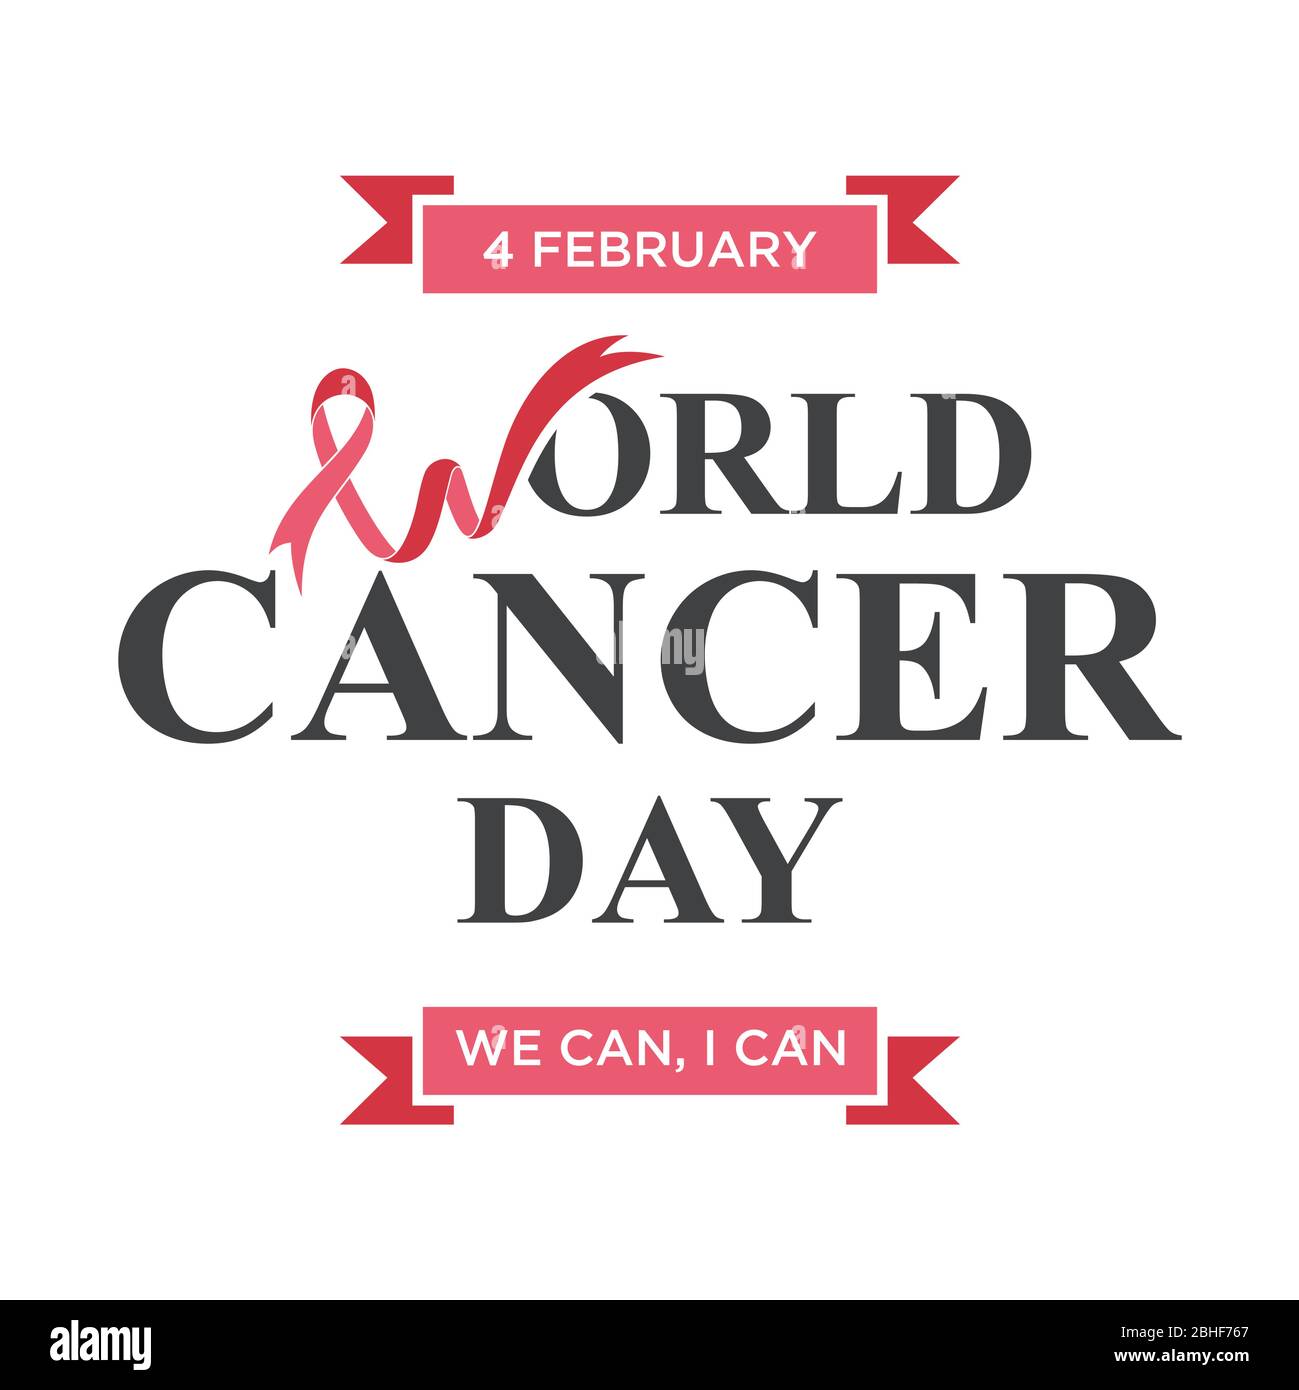 World cancer day lettering element design with letter w shaped ribbon. Vector illustration of World Cancer Day with ribbon and text. Stock Vector